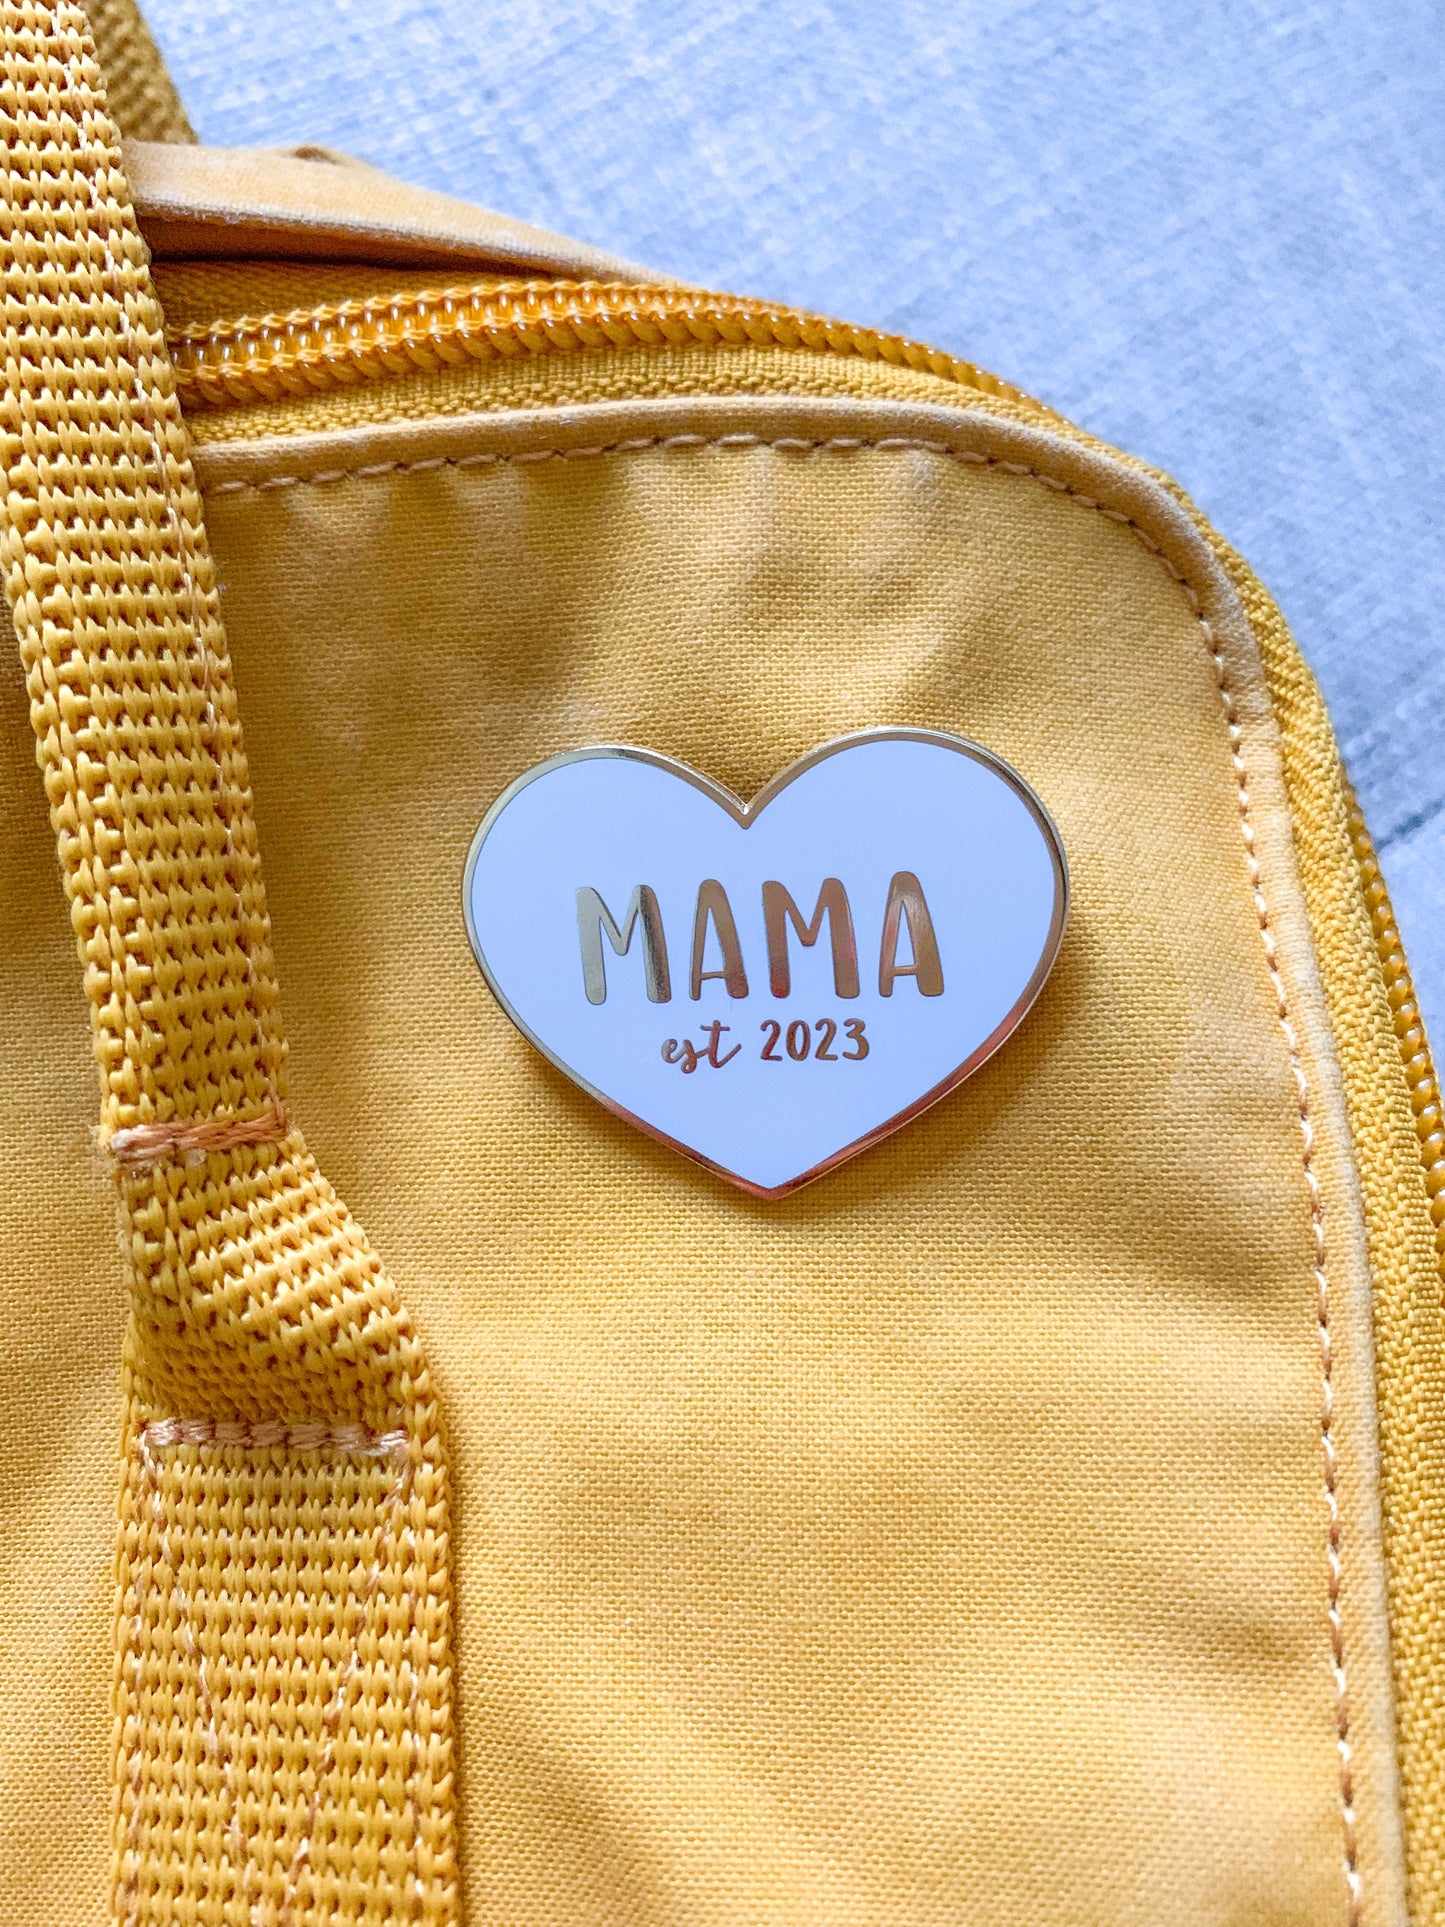 Mama enamel pin from Fourth Trimester Mama on a diaper bag